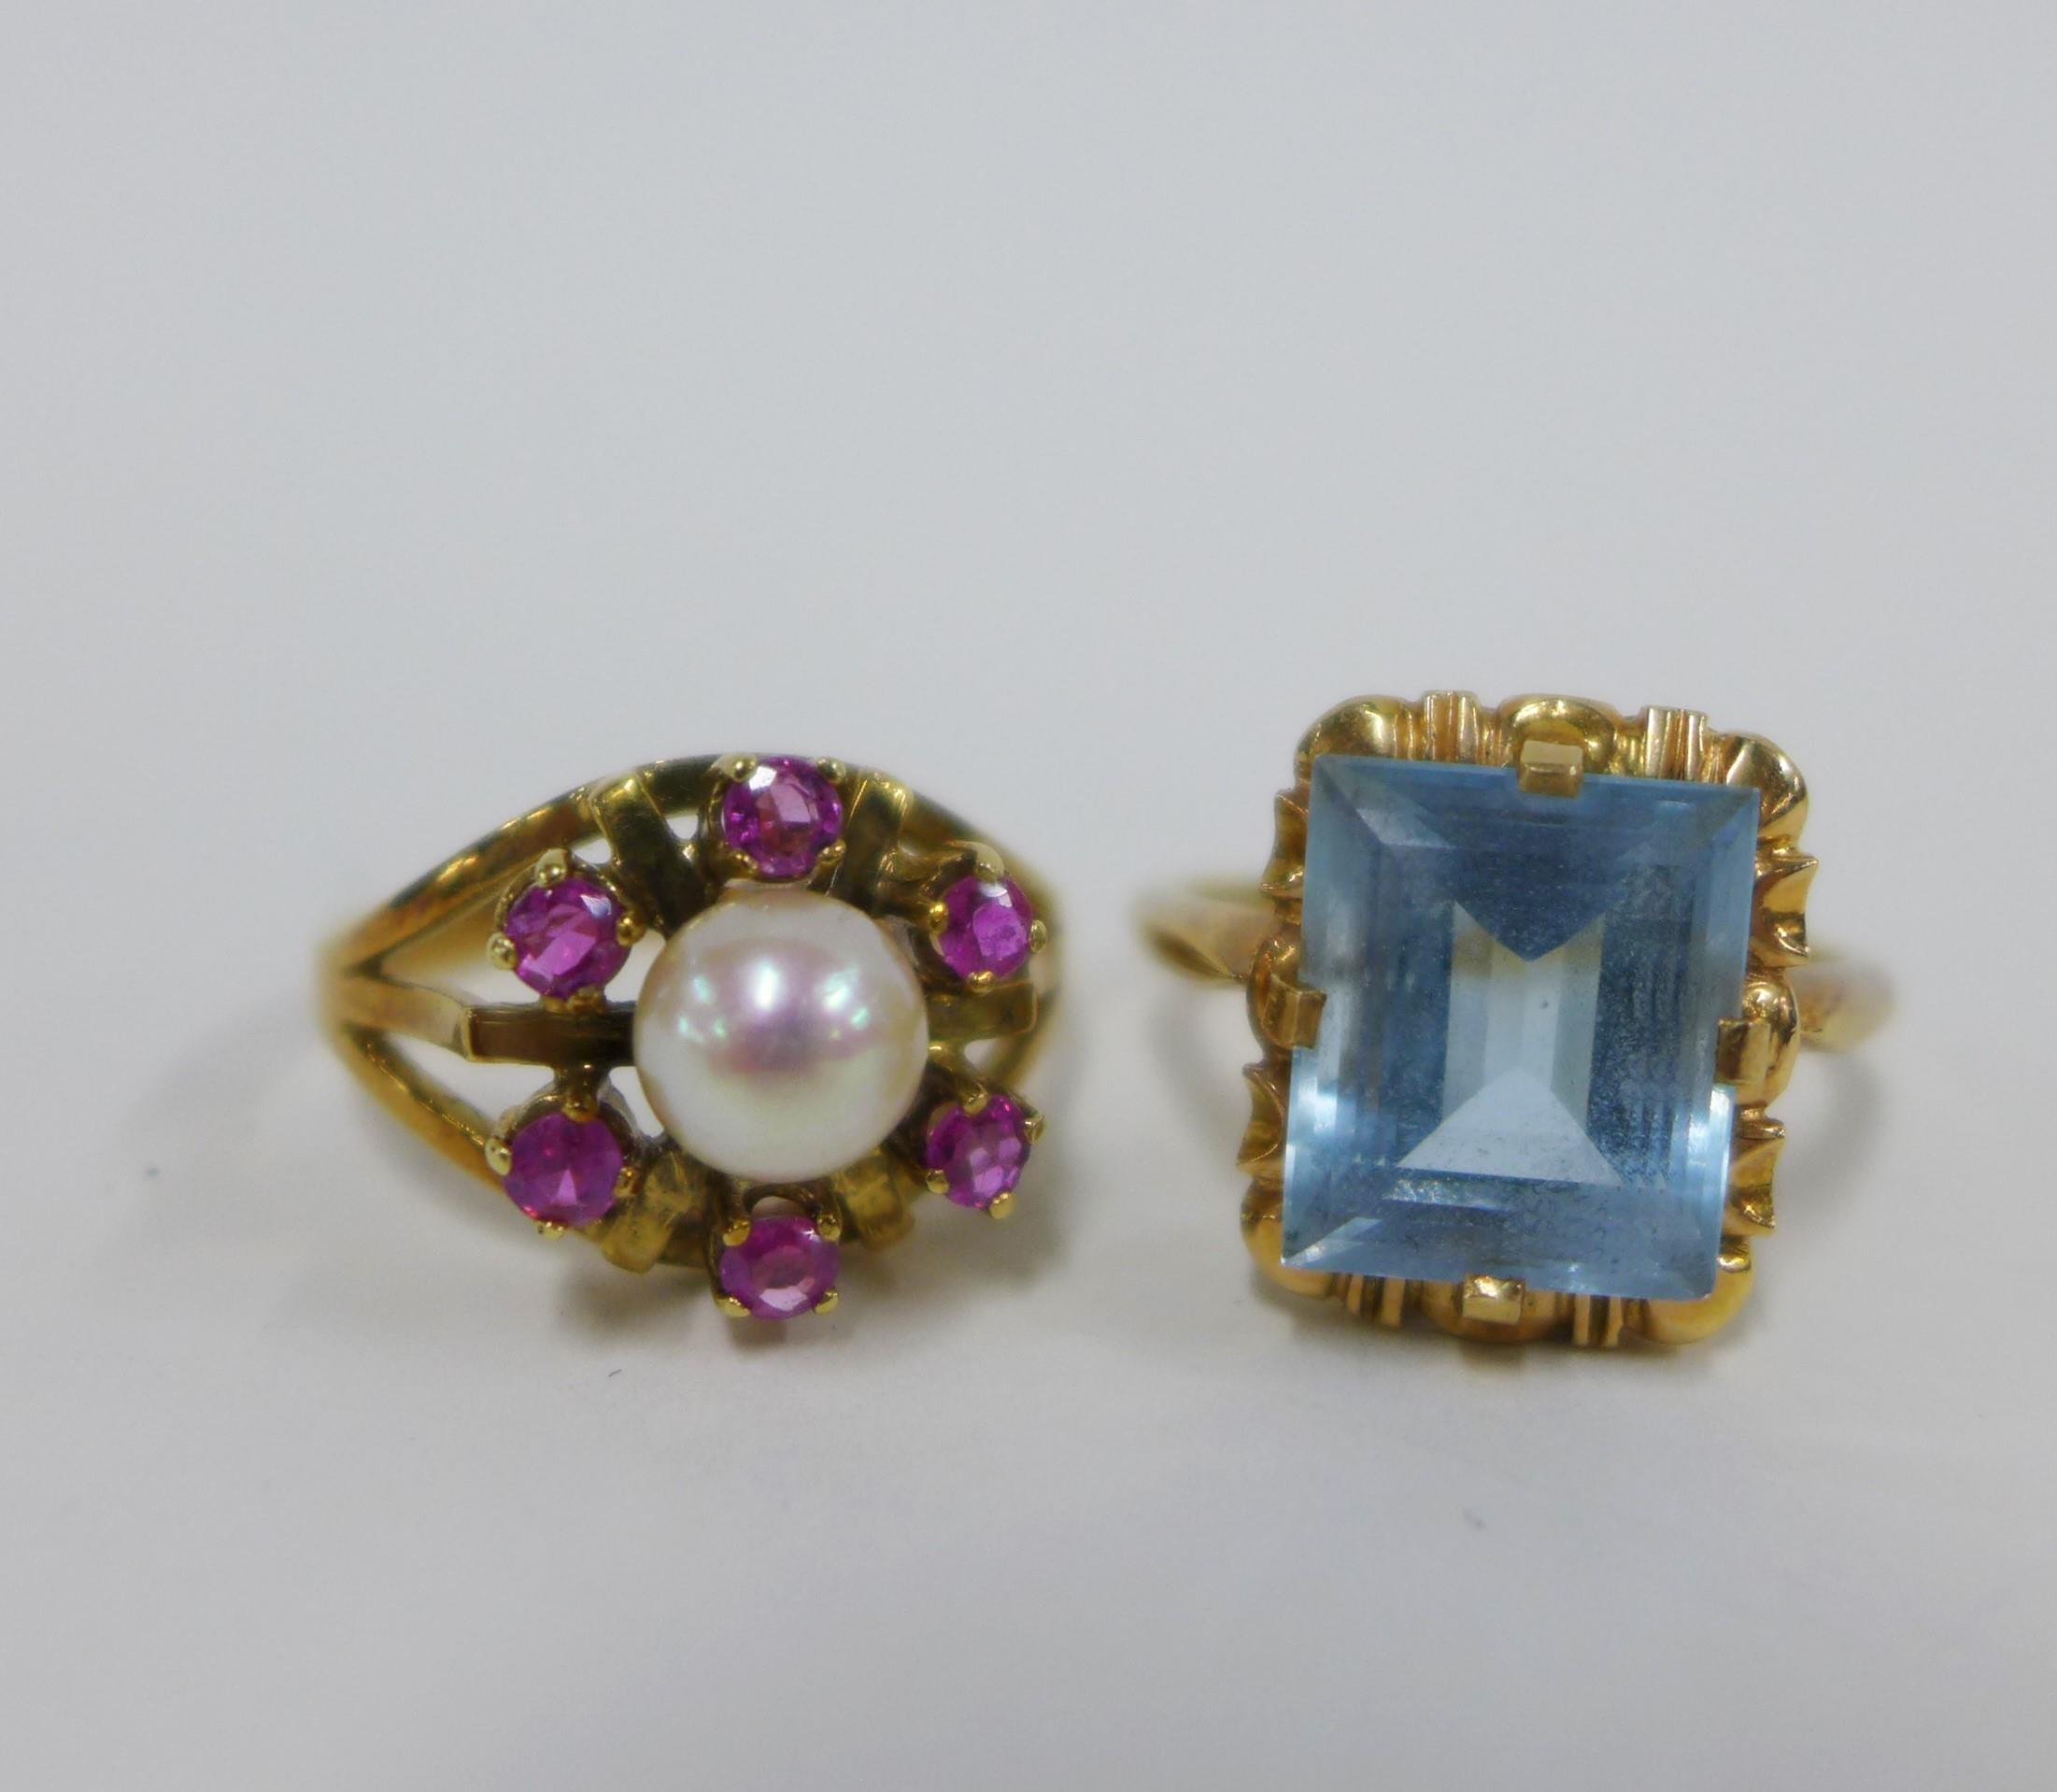 15ct gold dress ring with an emerald cut stone, another dress ring on an unmarked yellow metal - Image 2 of 4